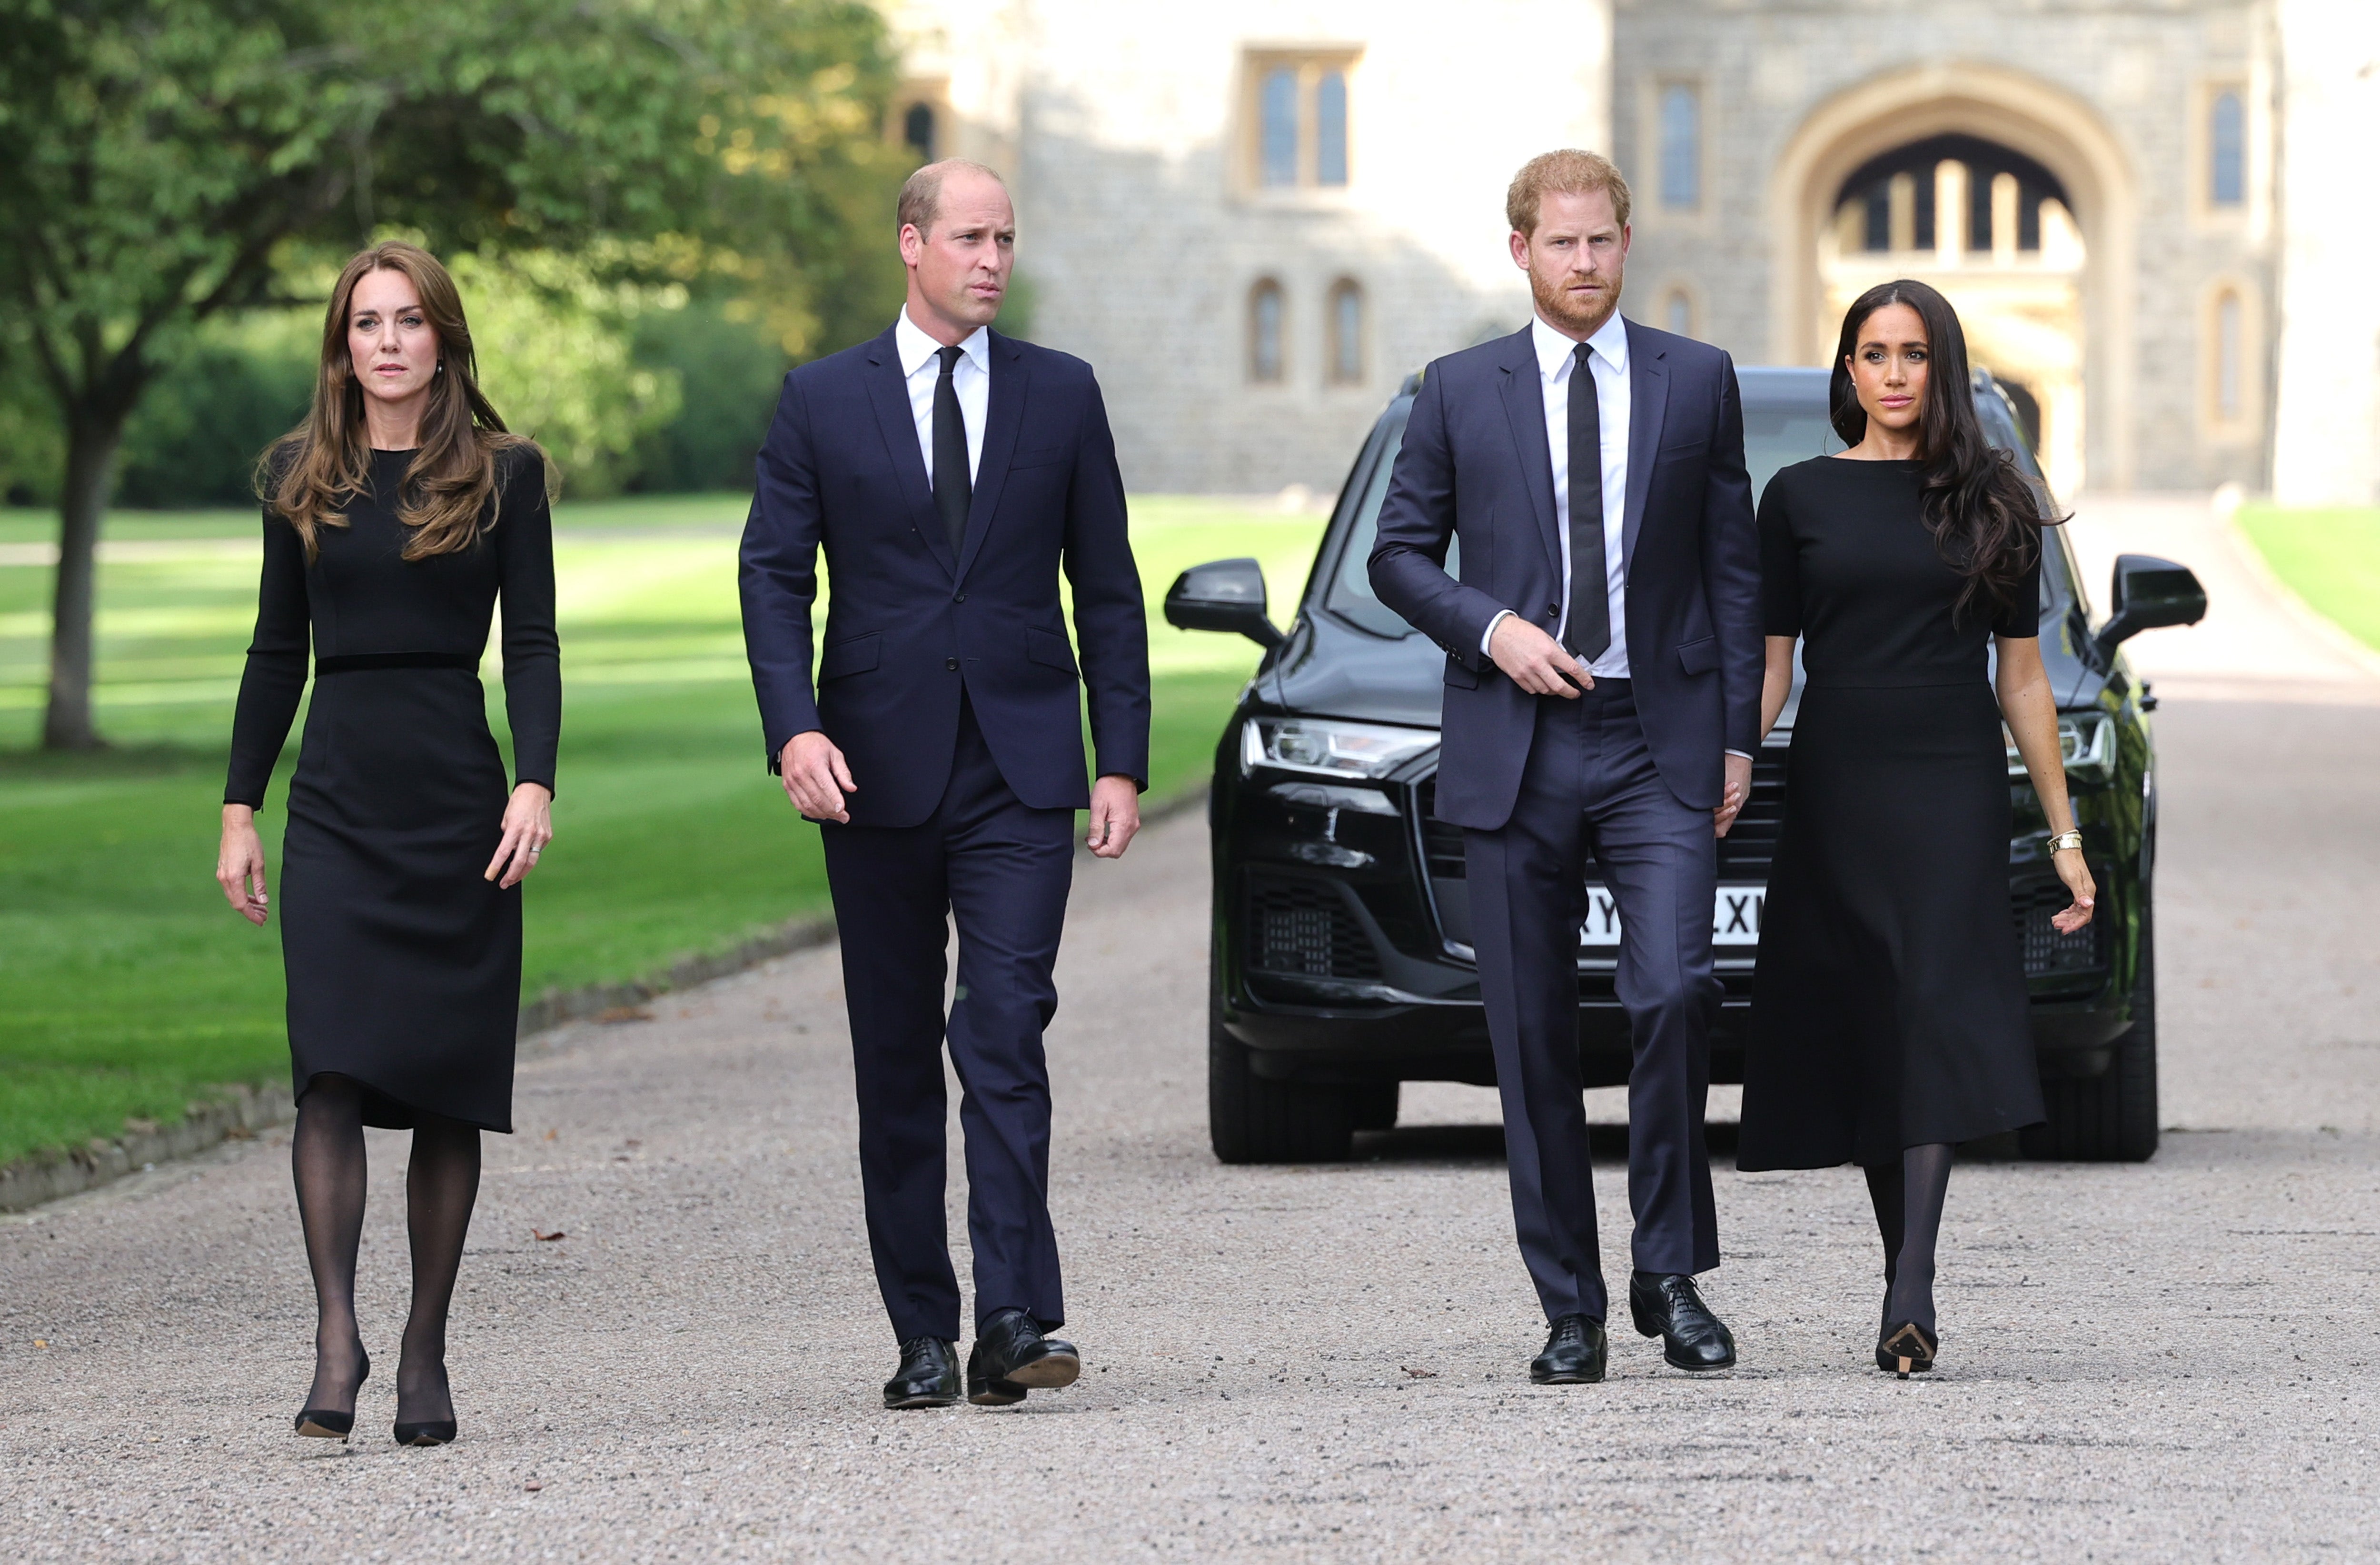 'Fab Four' royal reunion in US? William, Kate to be in Boston days before Harry, Meghan to be honored in NY